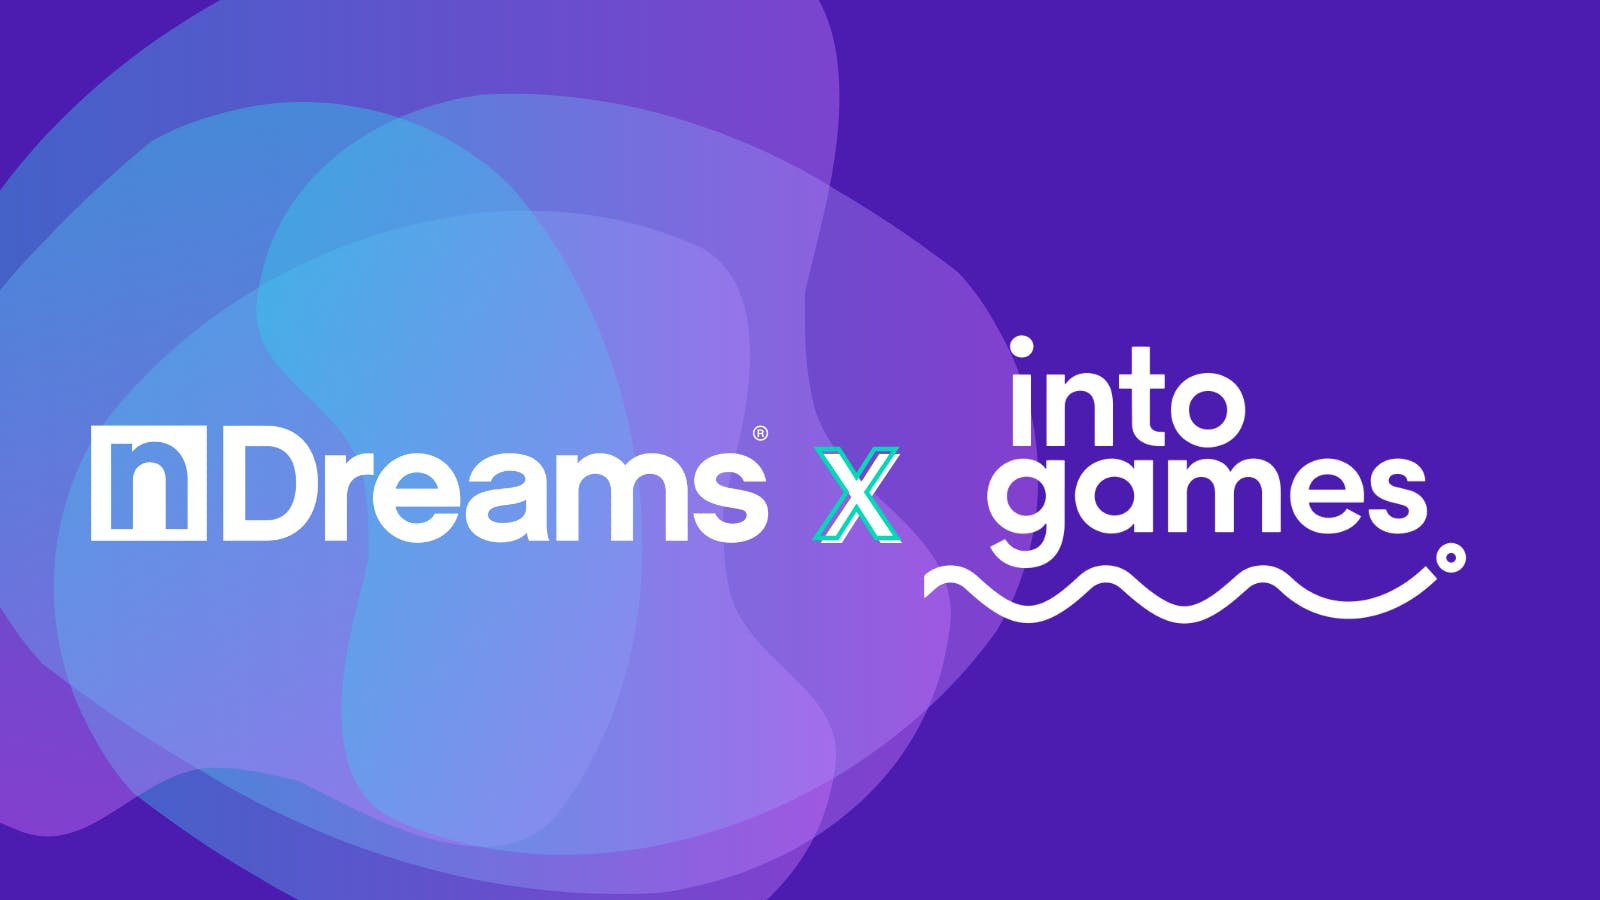 nDreams are Into Games Partners